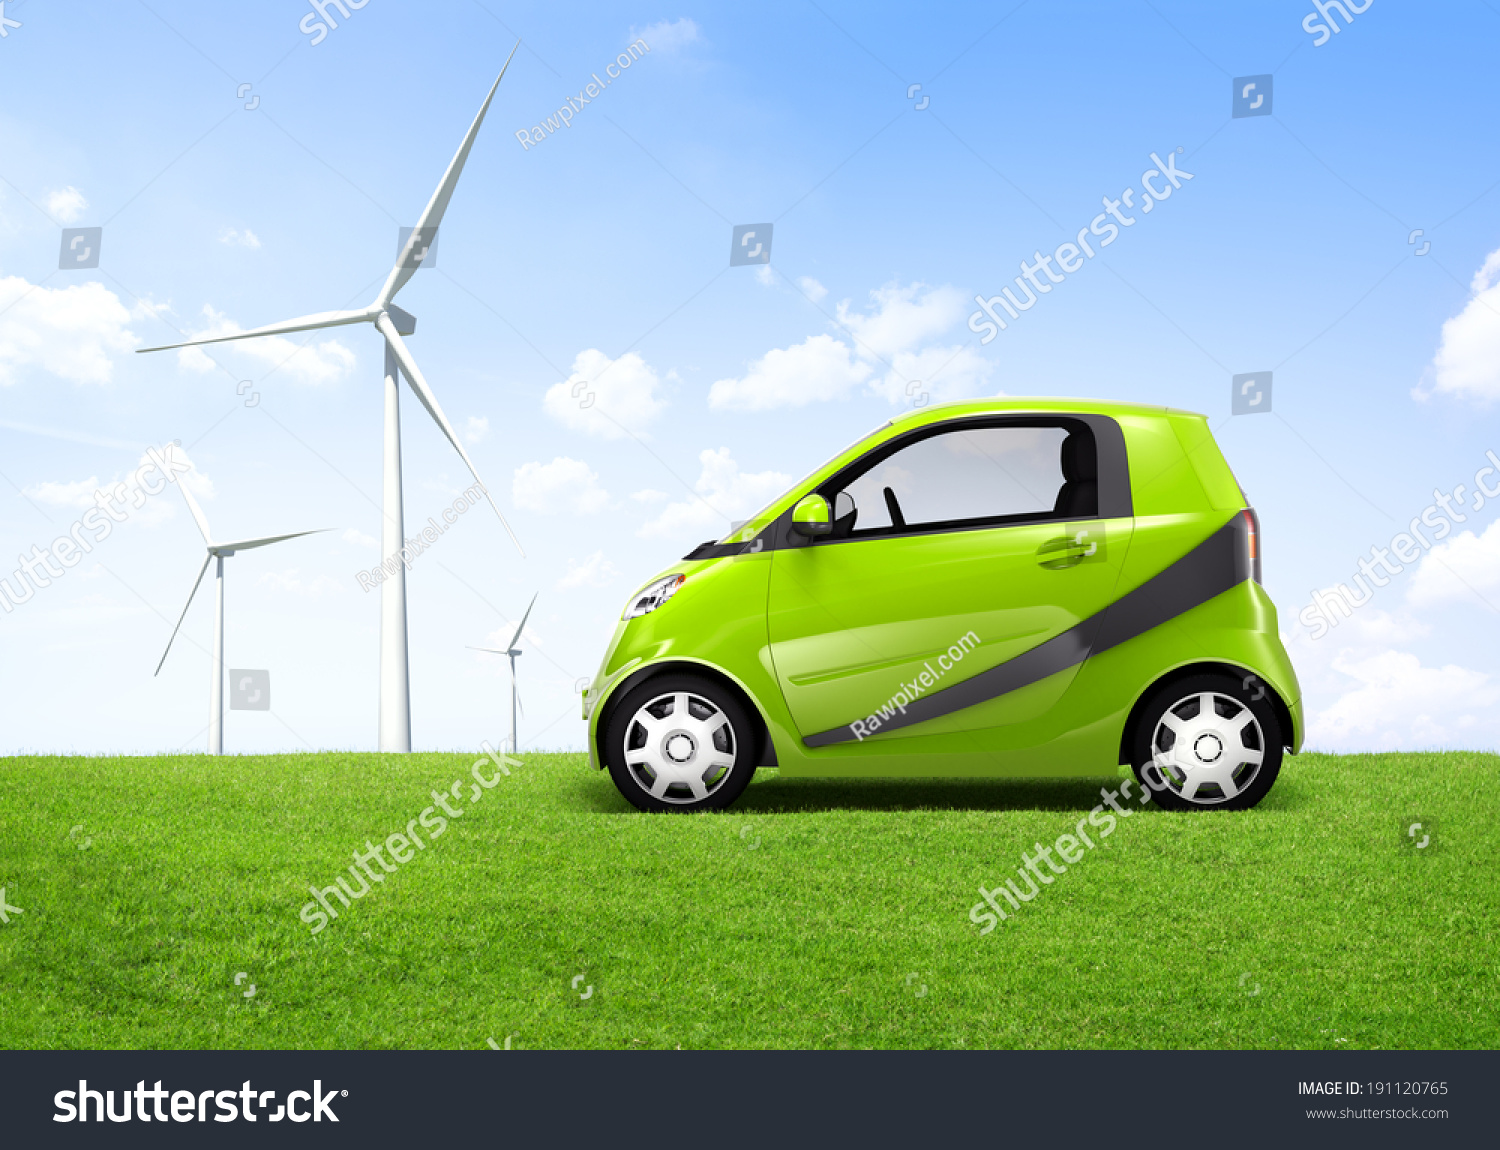 Electric Green Car In The Outdoor With A View Of Windmill Behind It 